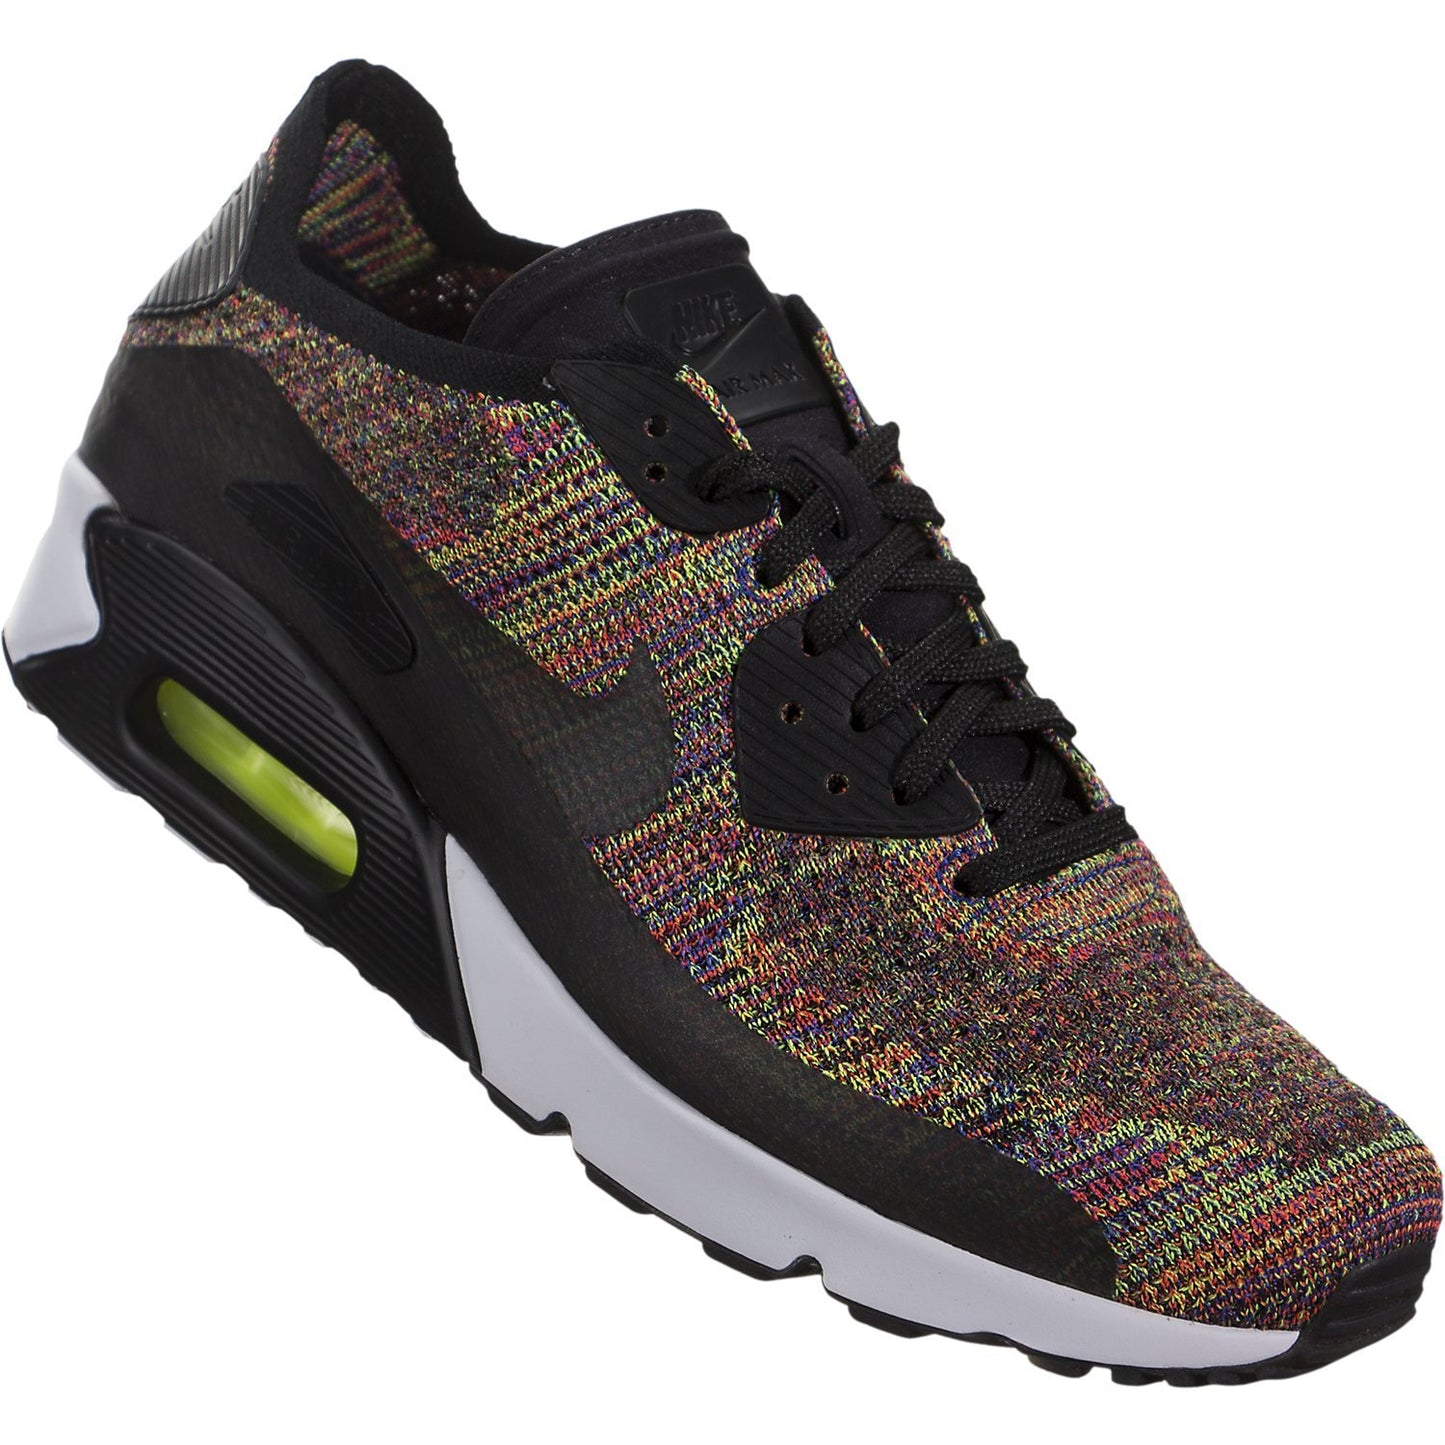 Nike Air Max 90 Ultra 2.0 Flyknit Multicolor 875943-002